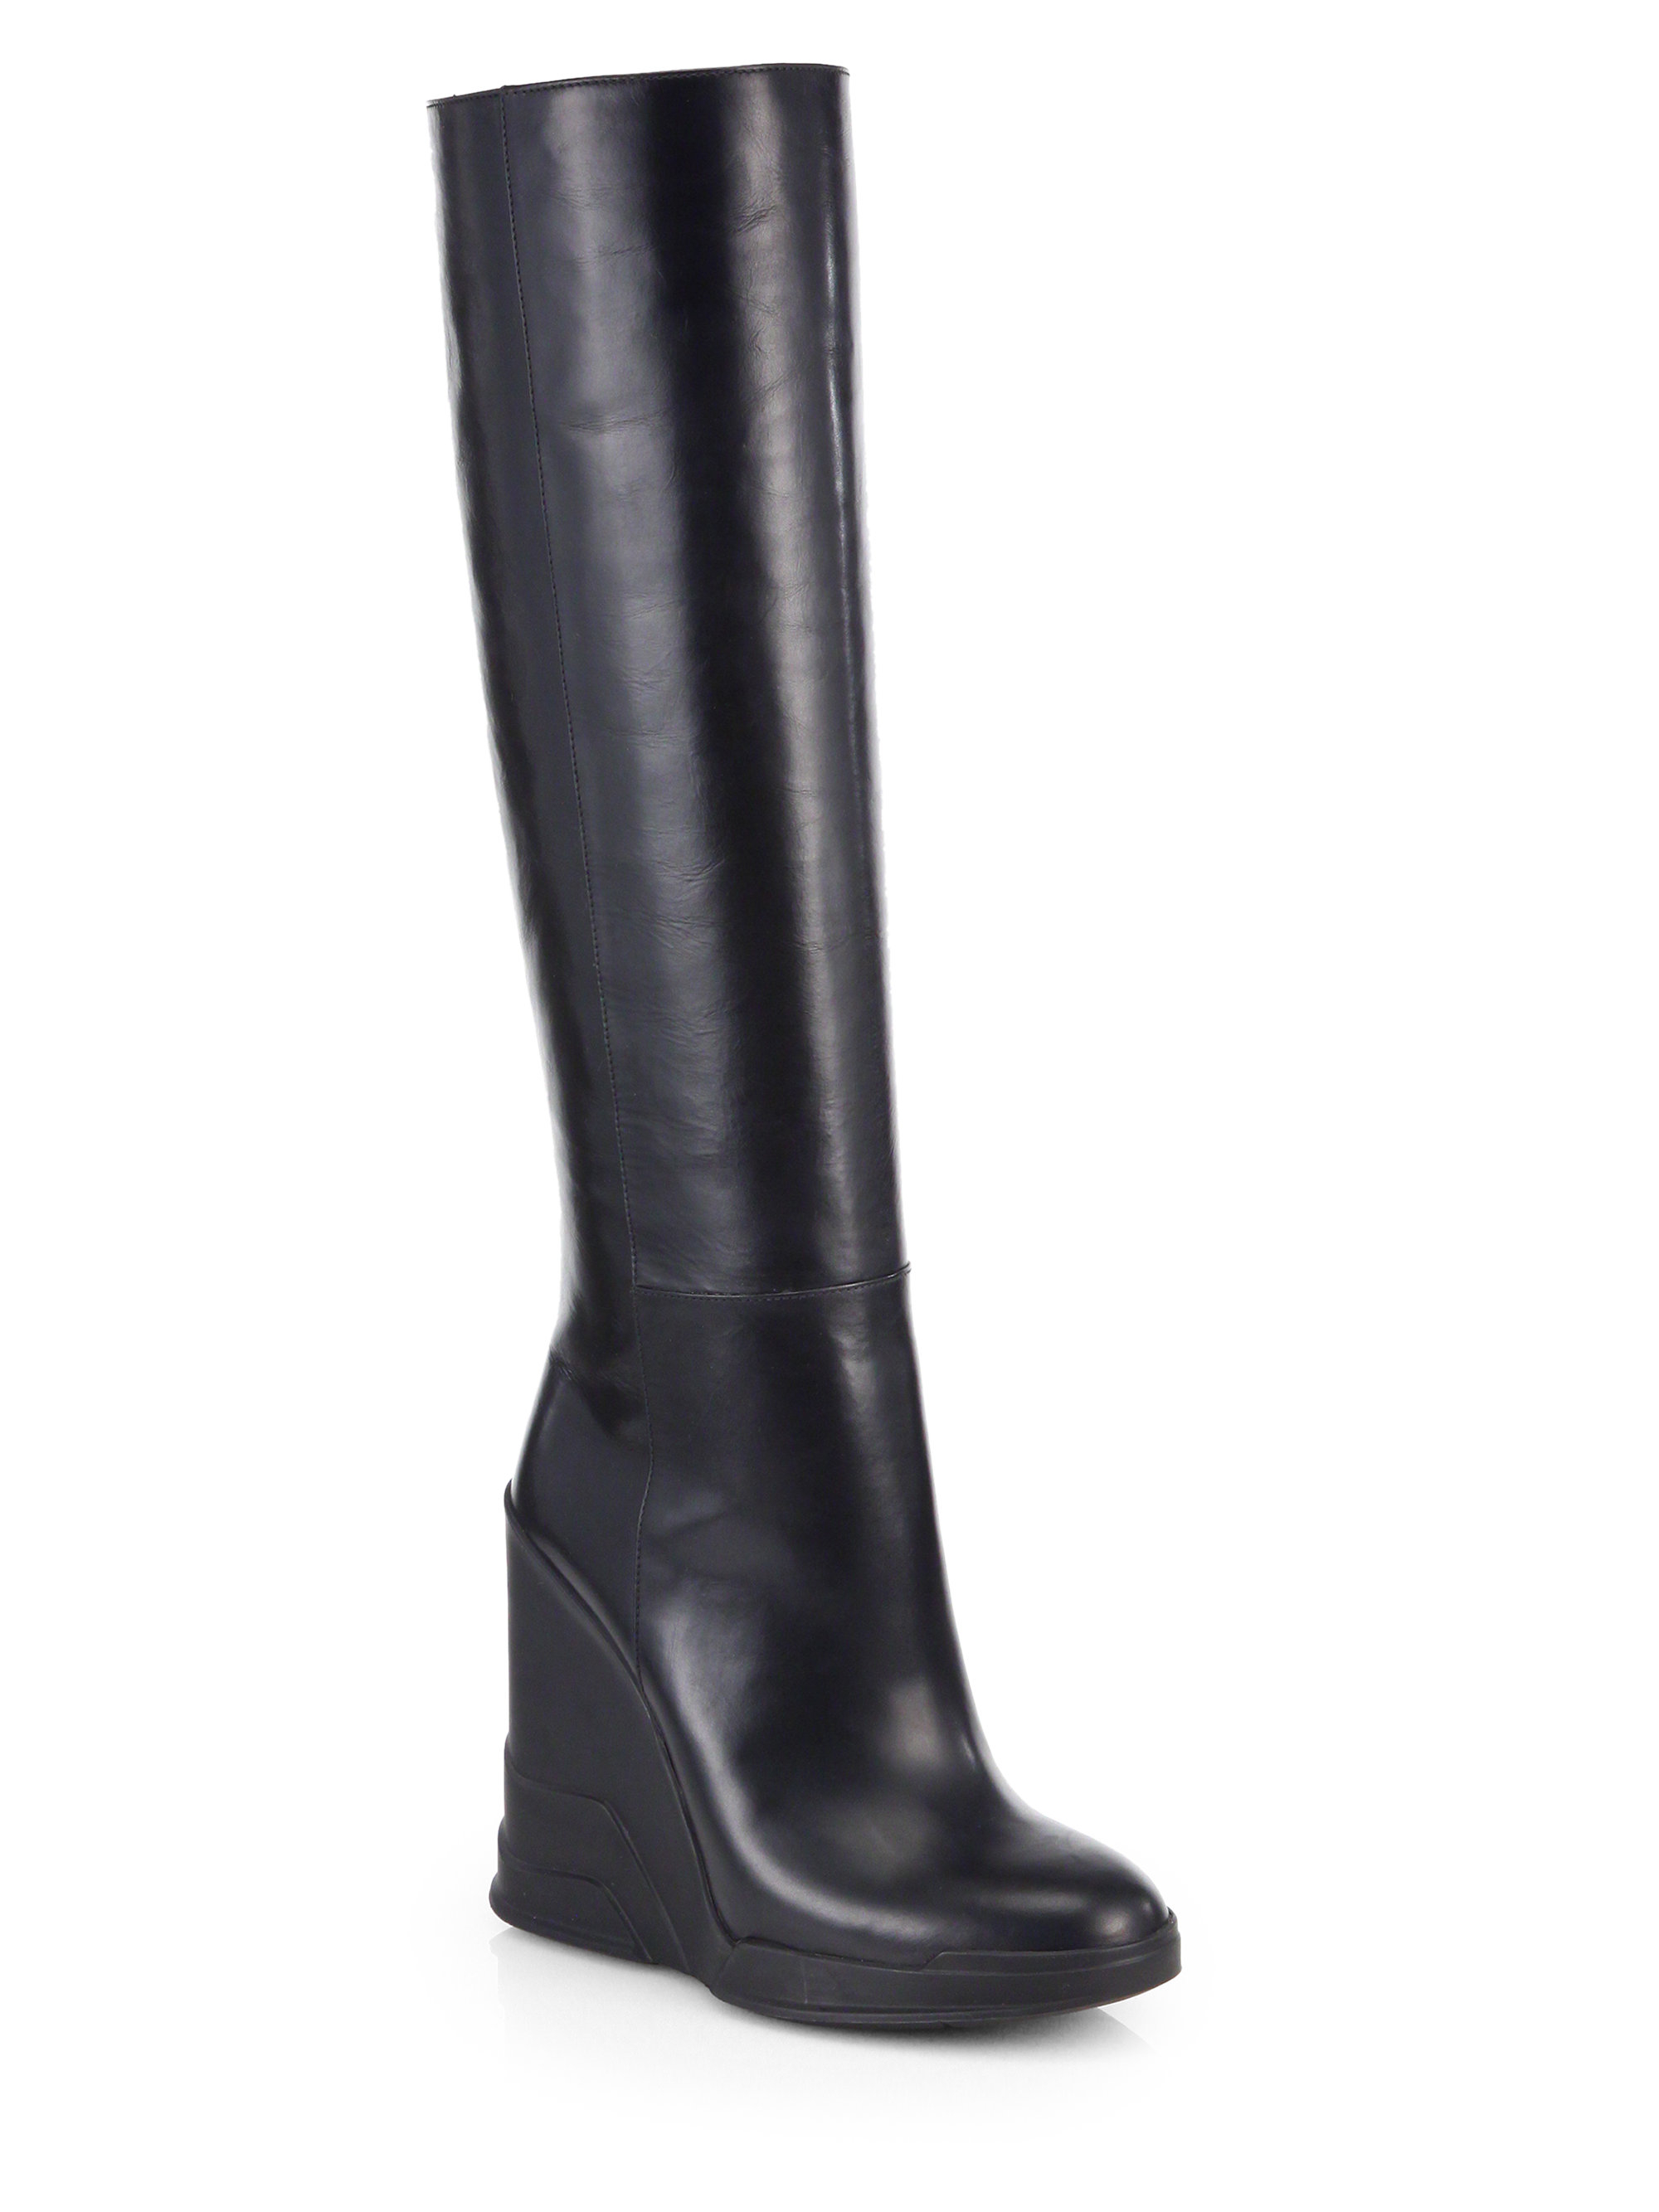 black wedge boots sale